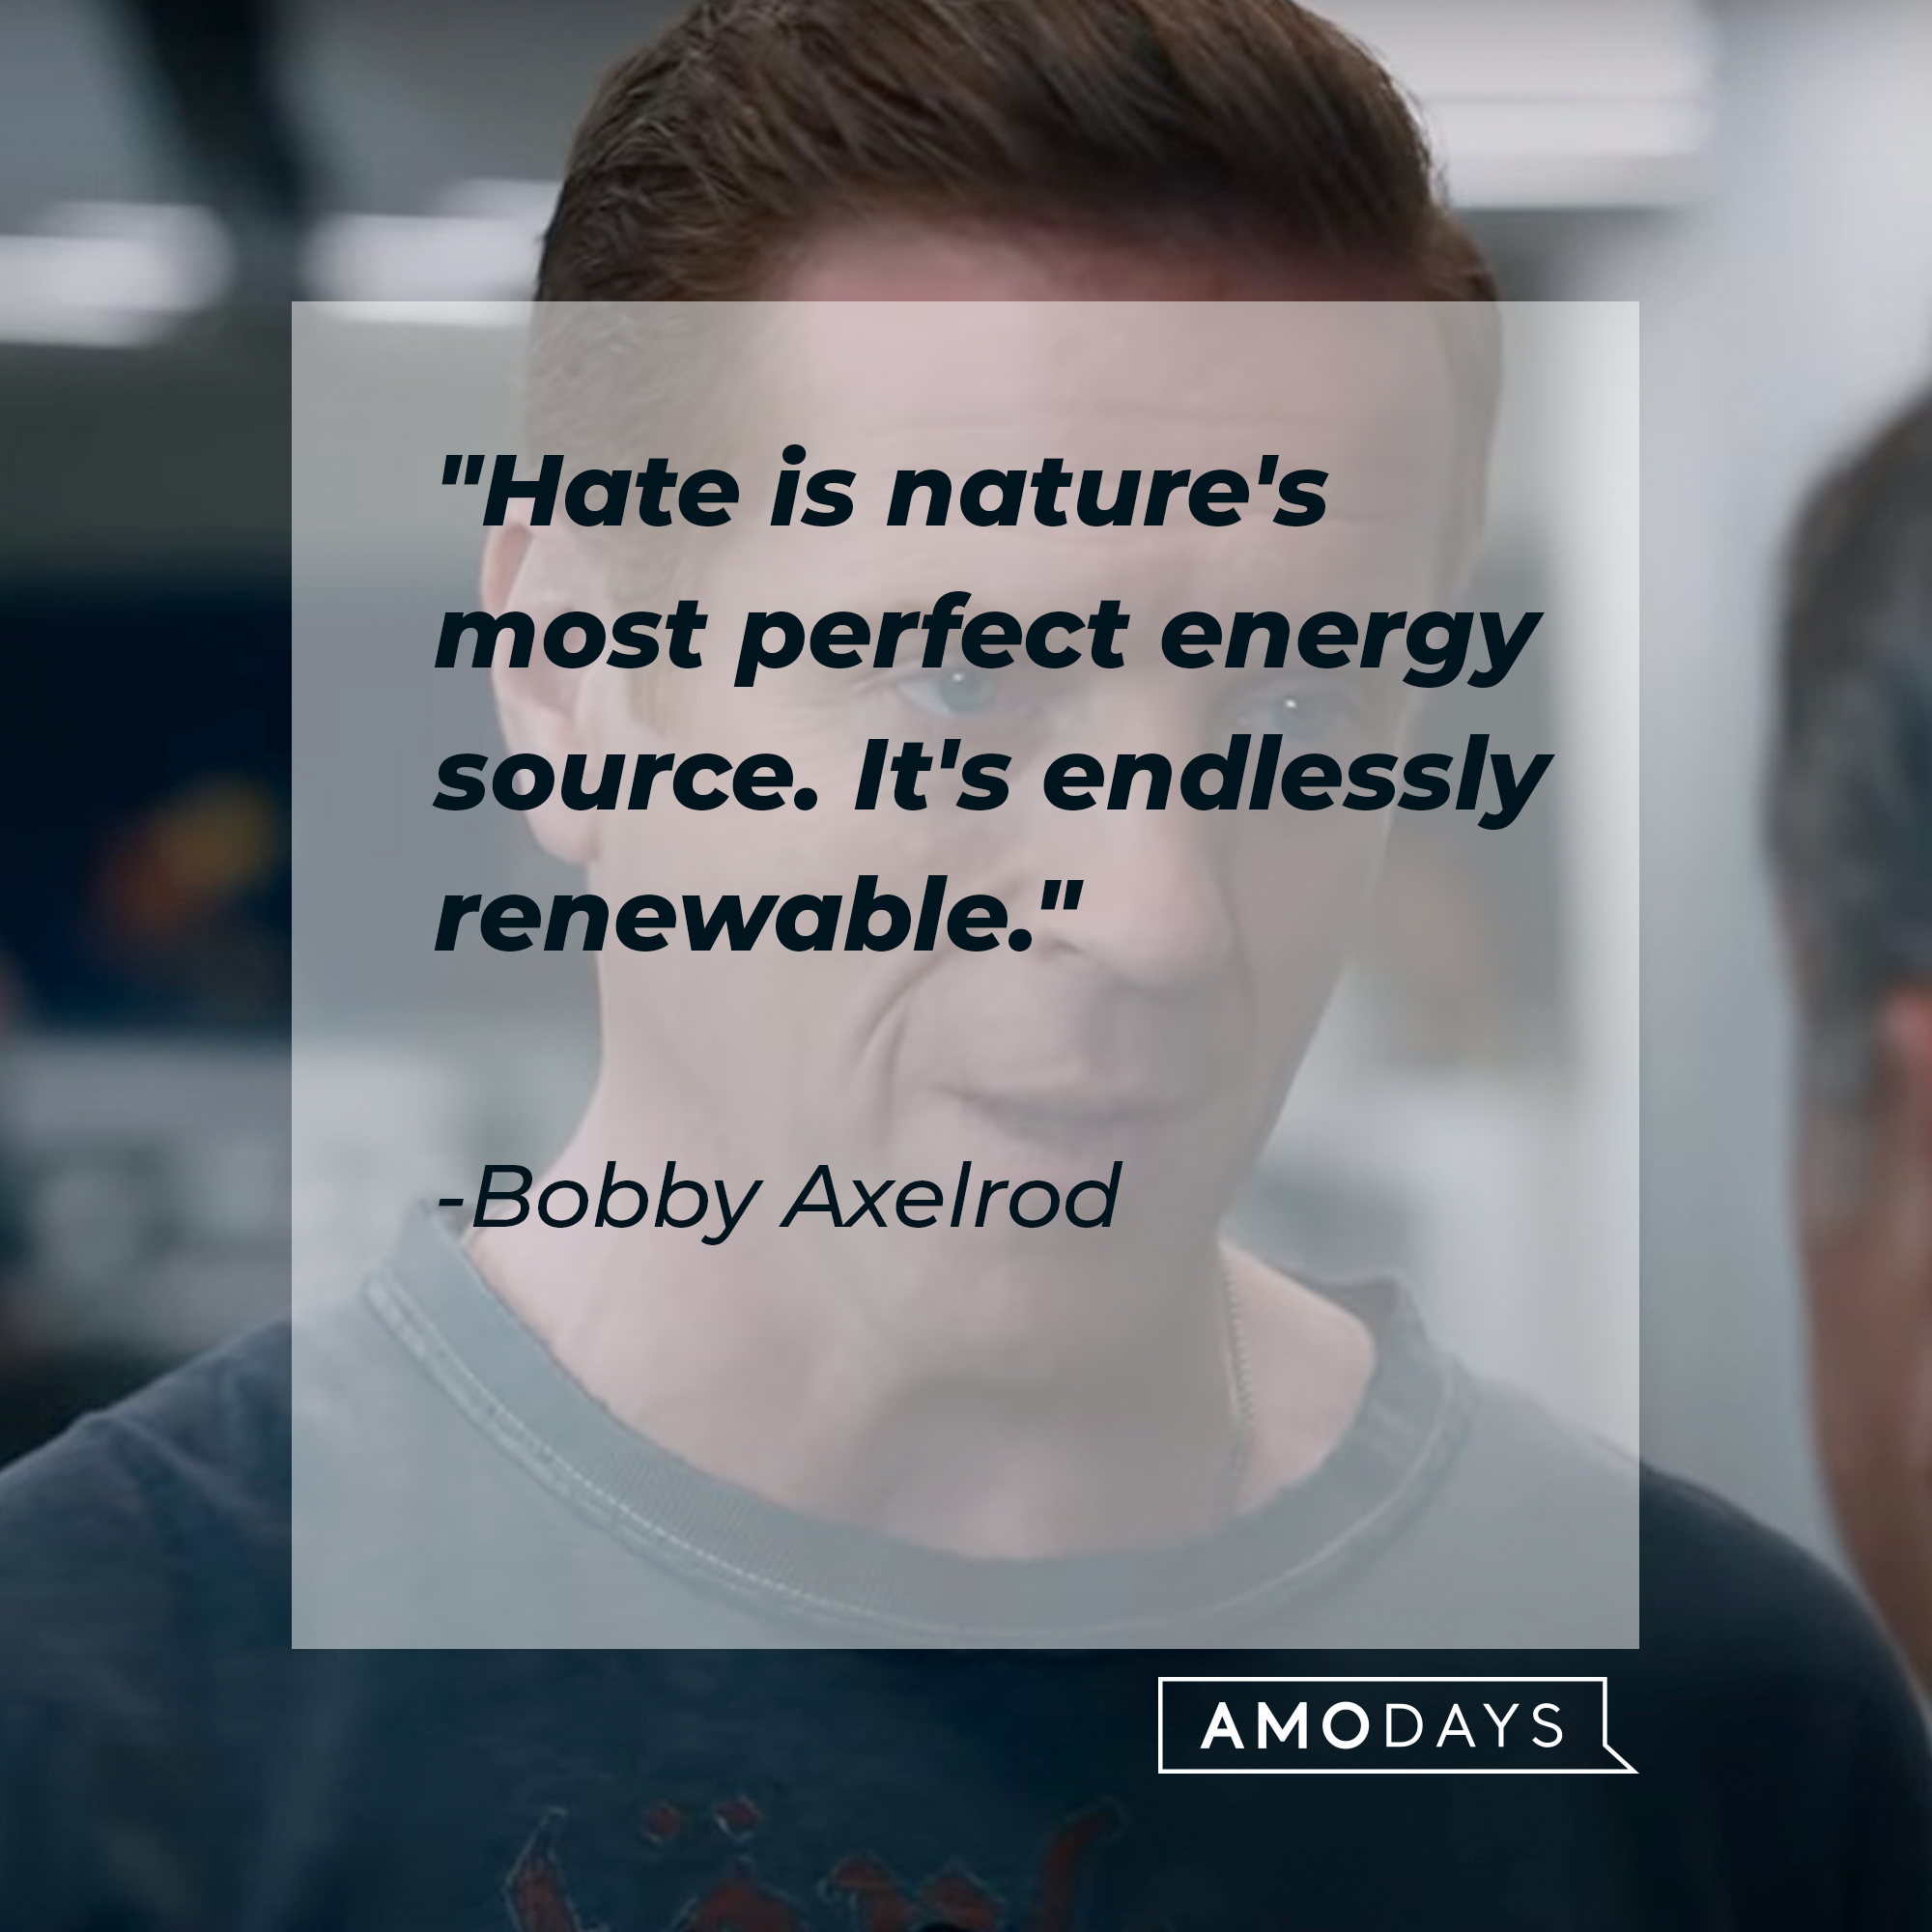 Bobby Axelrod's quote: "Hate is nature's most perfect energy source. It's endlessly renewable." | Source: Youtube.com/BillionsOnShowtime